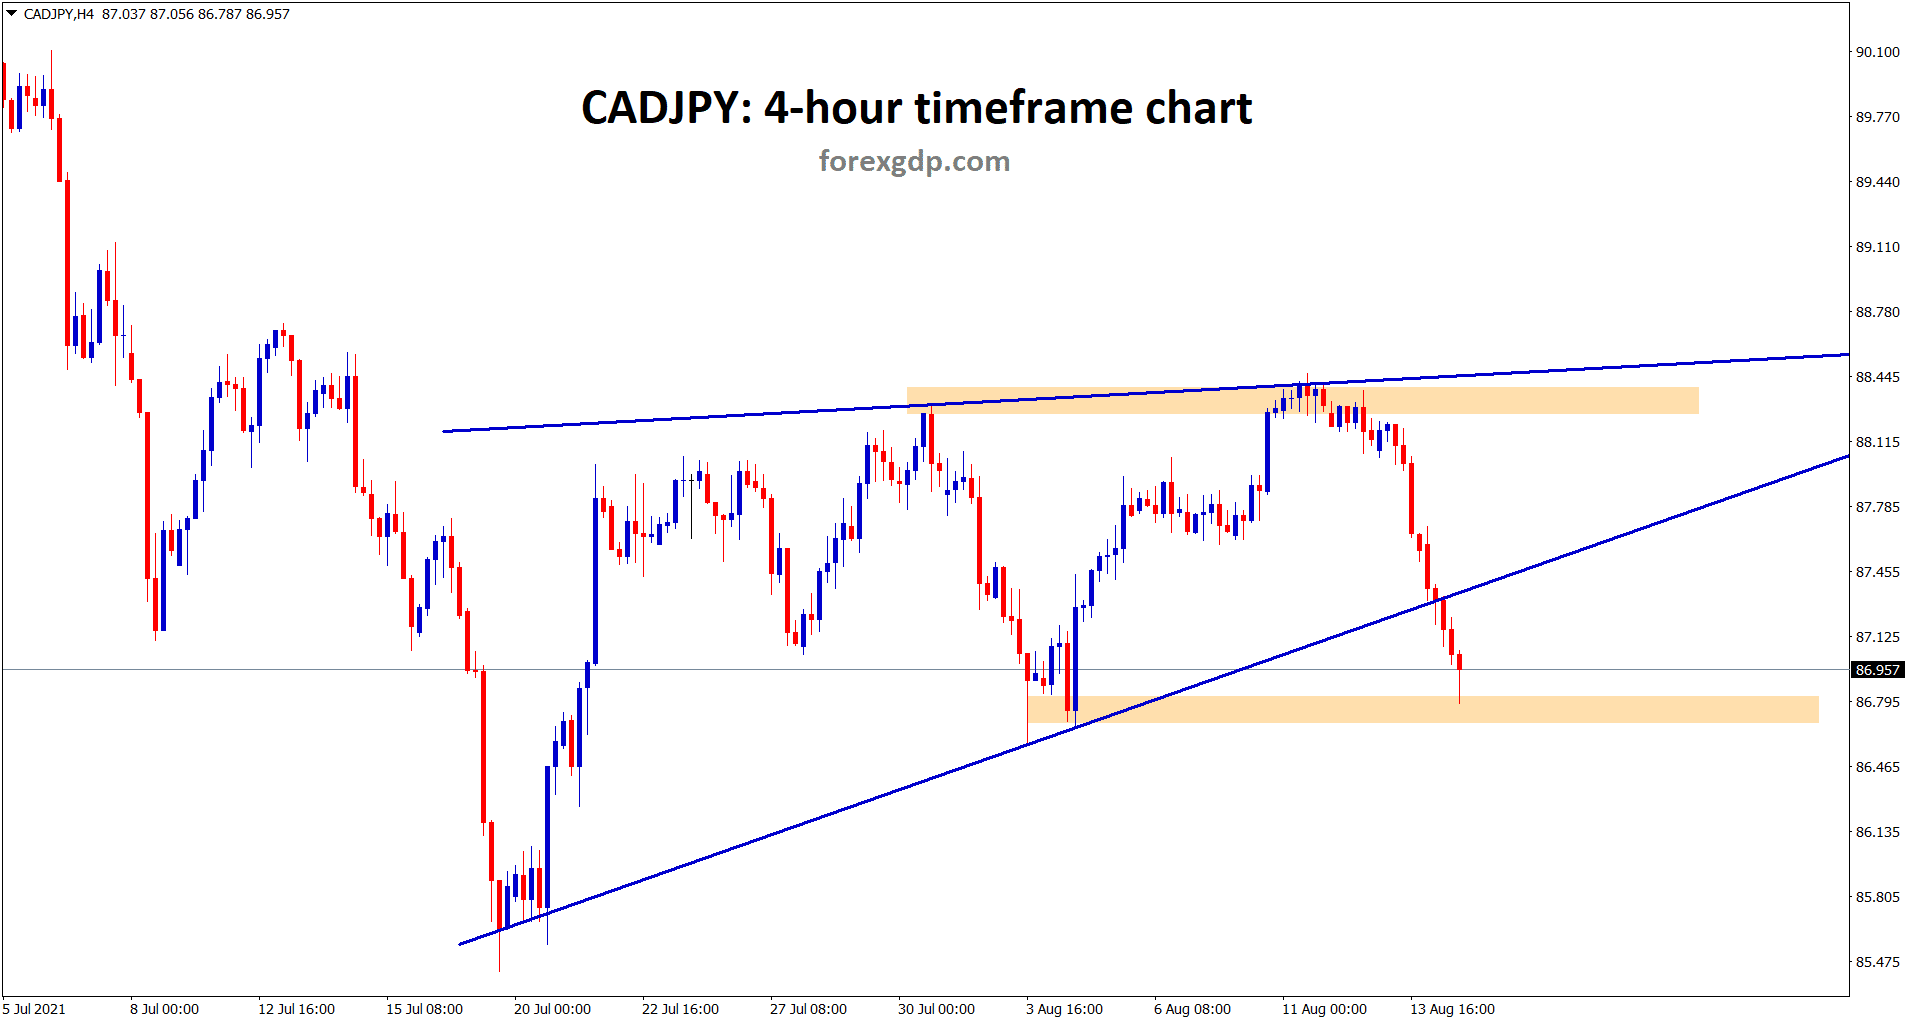 CADJPY hits the horizontal support